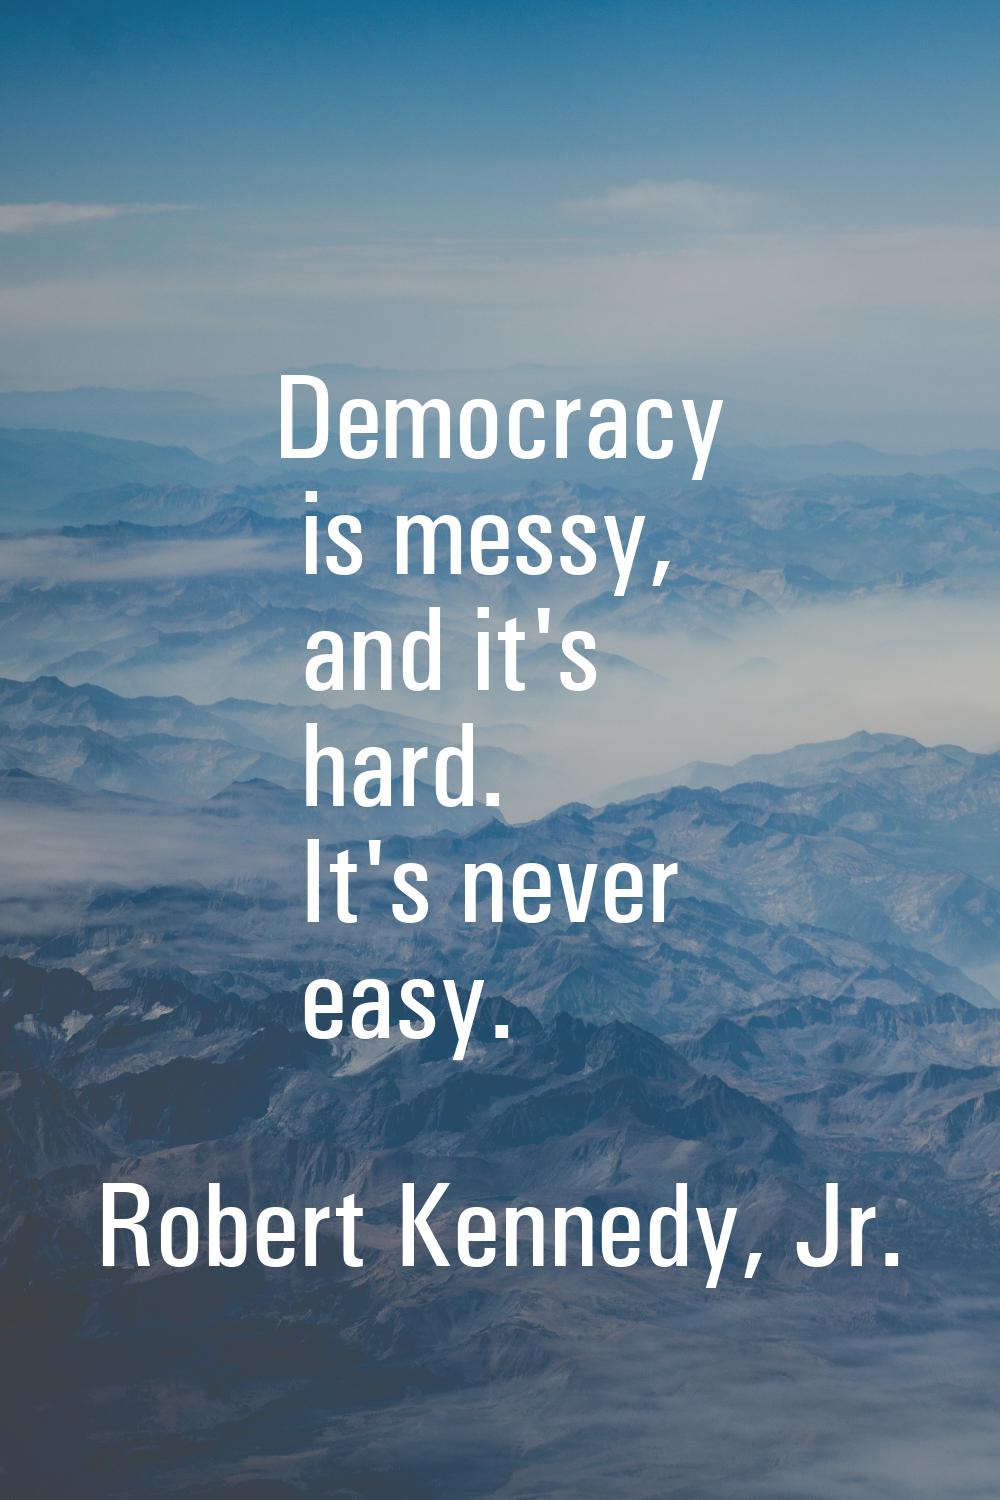 Democracy is messy, and it's hard. It's never easy.